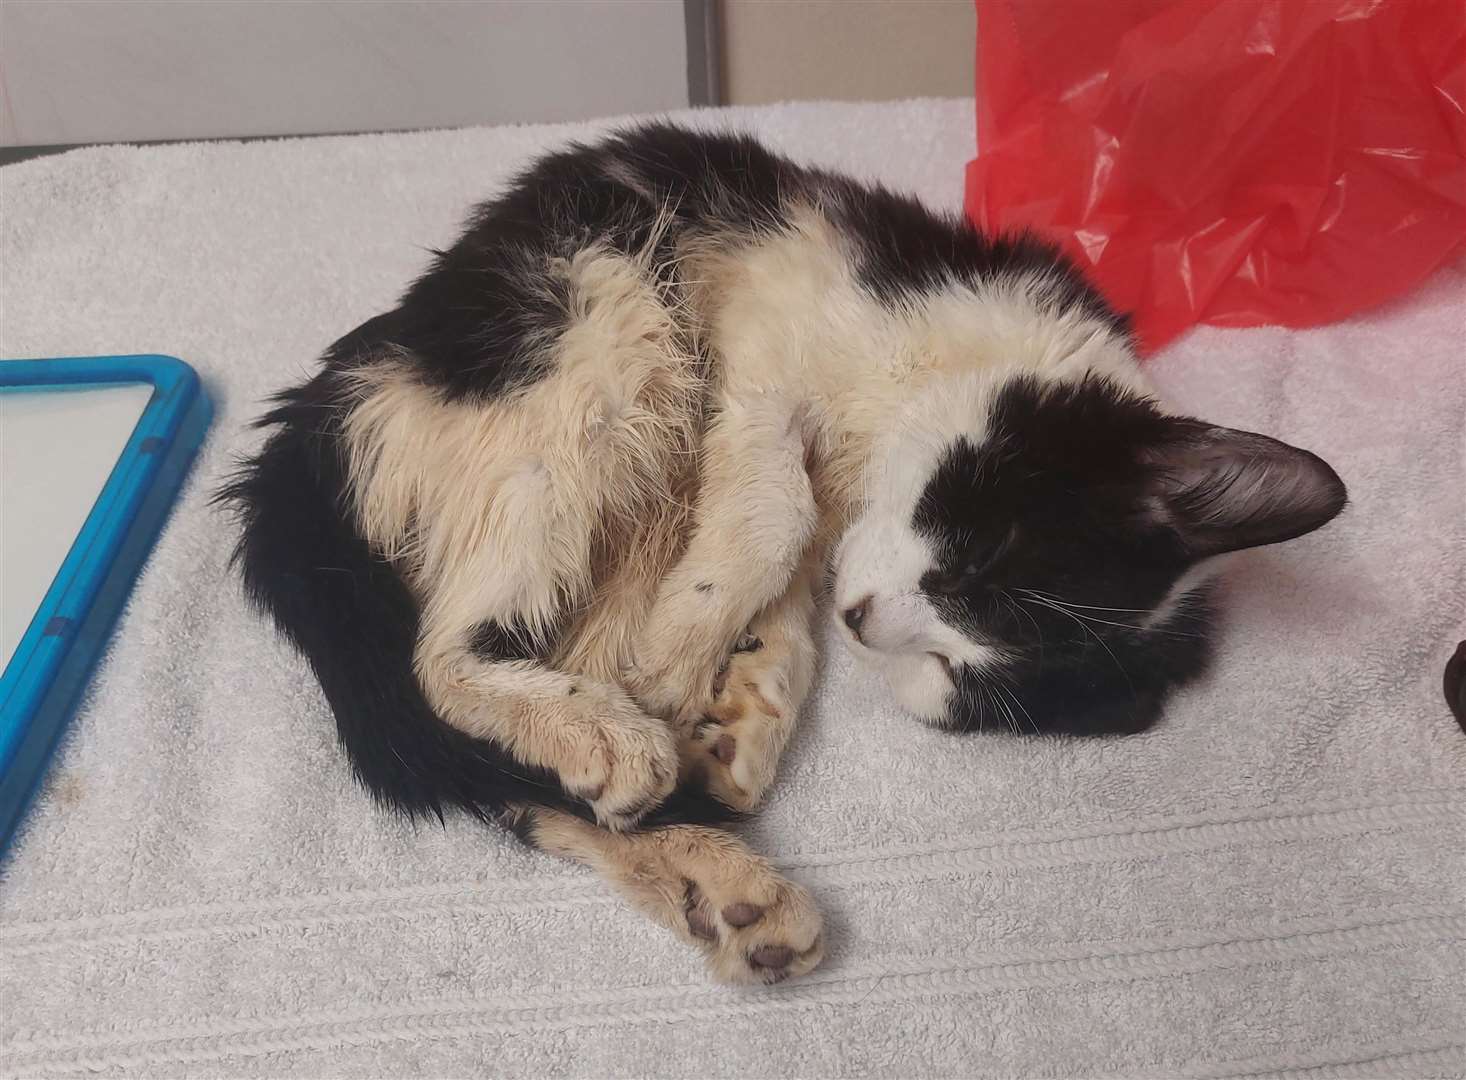 The cat was found abandoned outside a rugby club